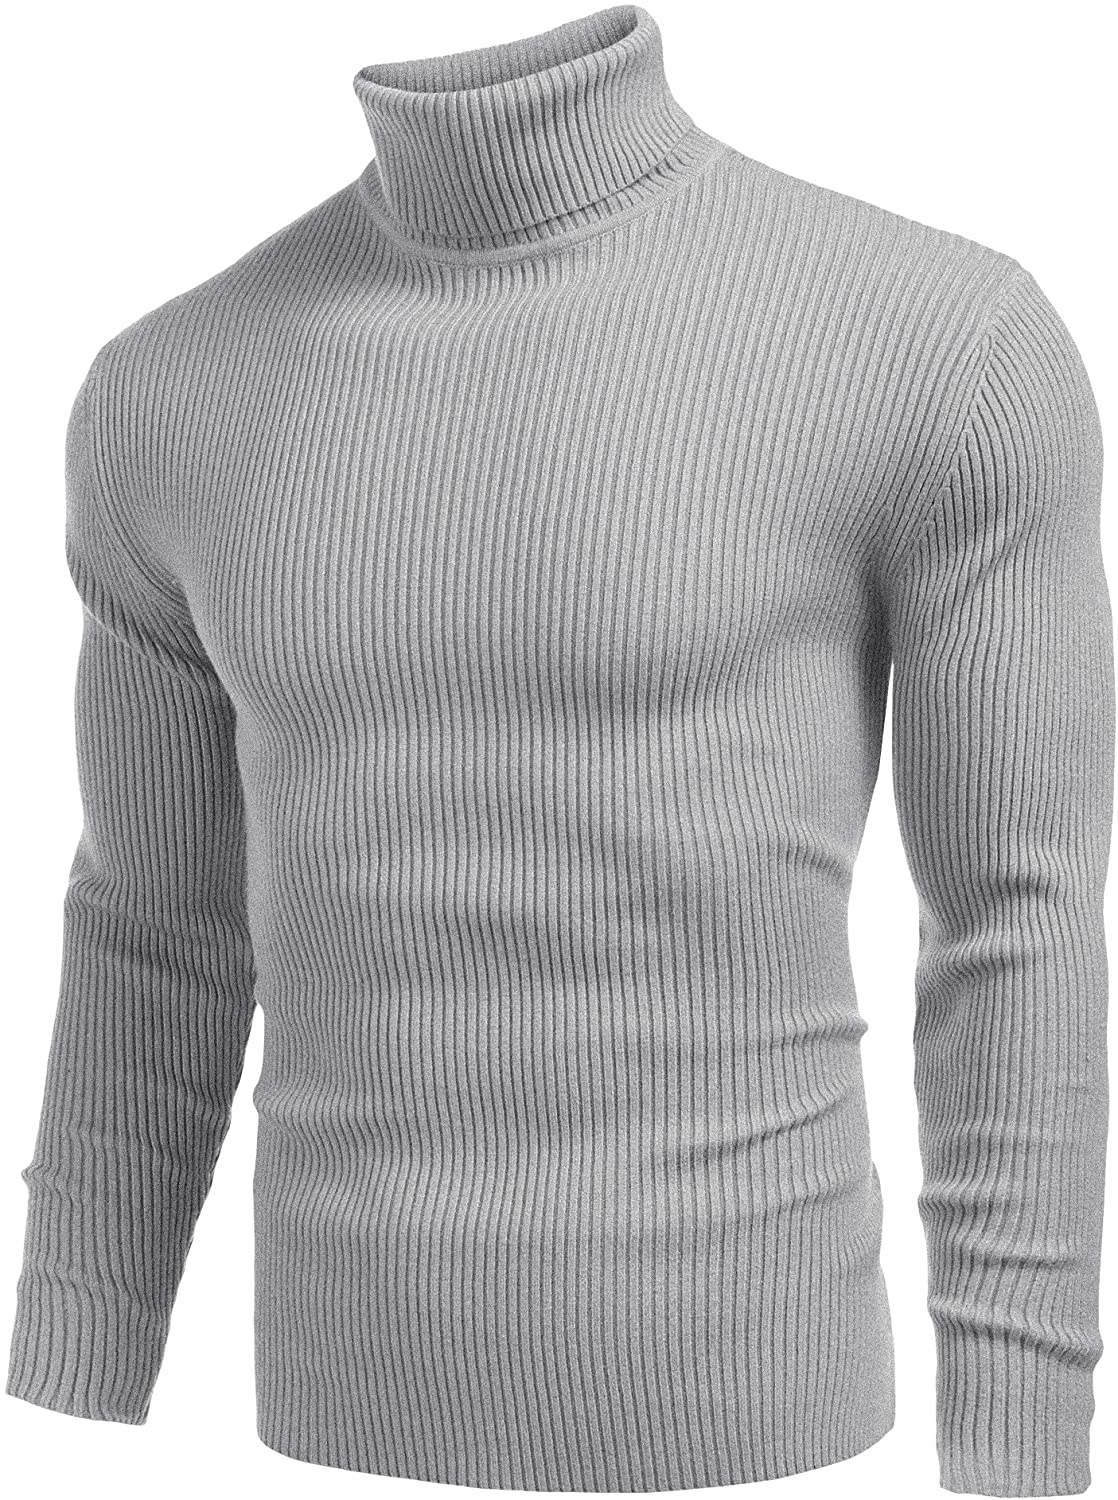 COOFANDY Mens Ribbed Slim Fit Knitted Pullover Turtleneck Sweater | eBay